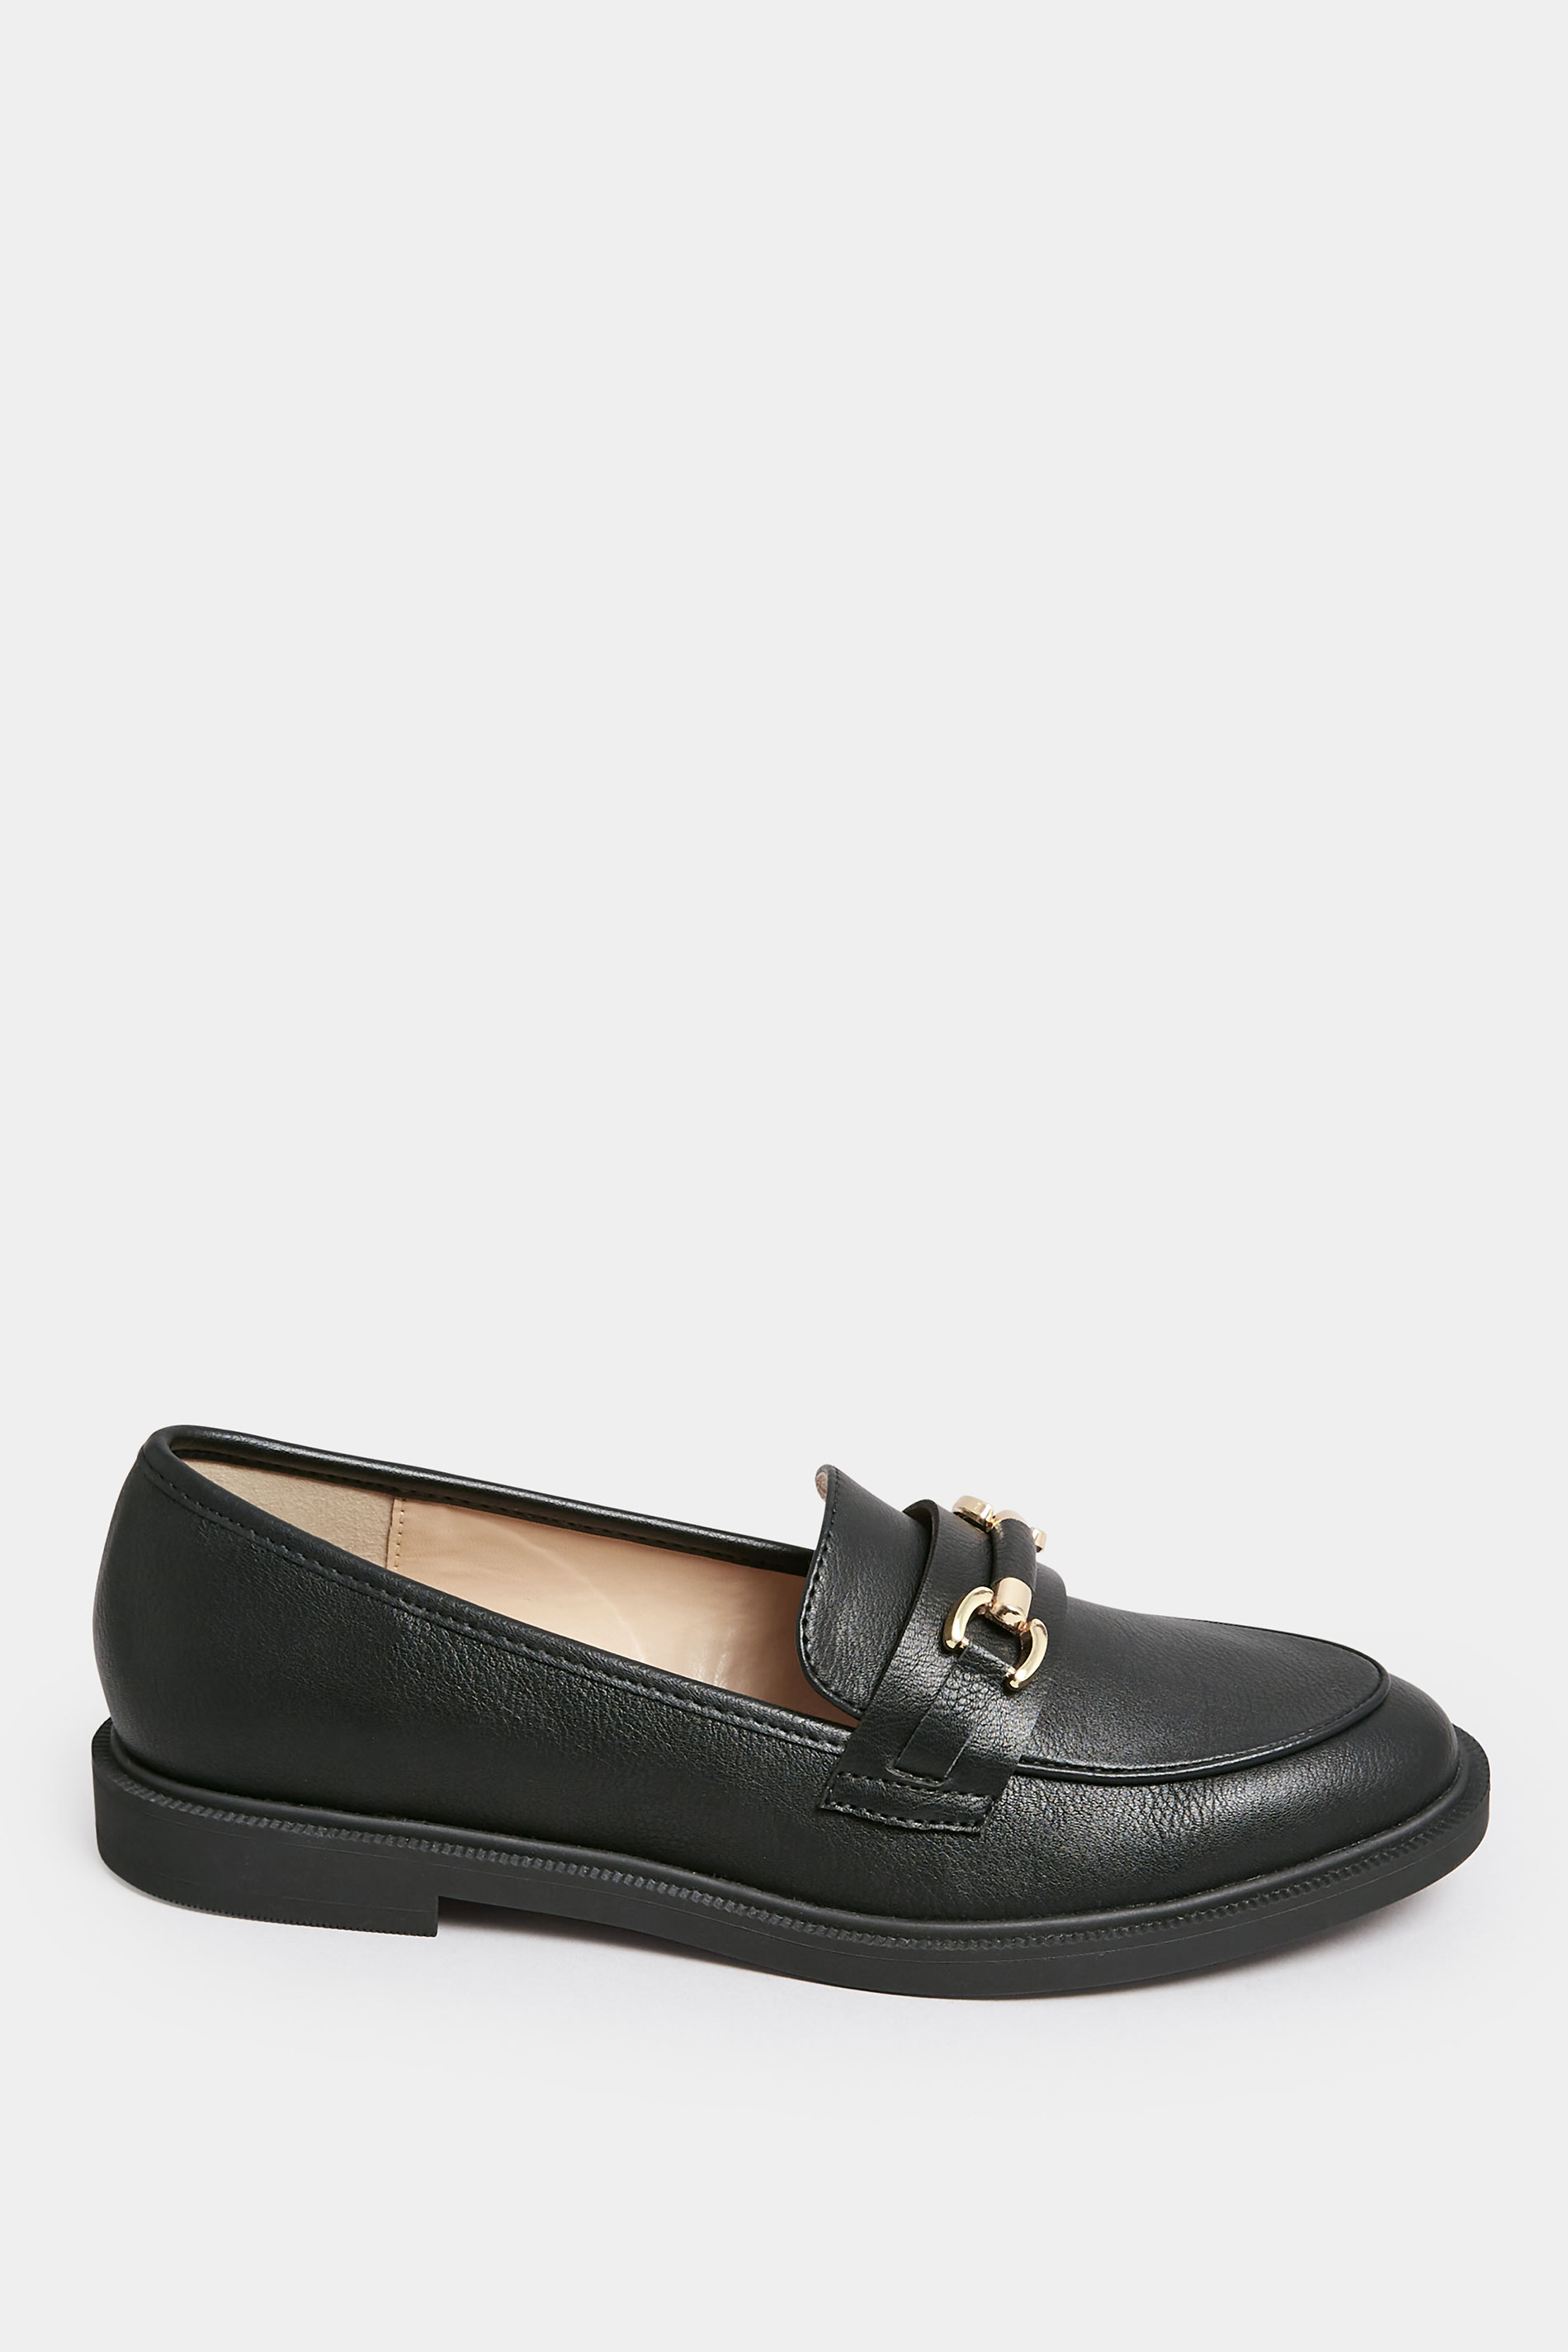 Black PU Chain Detail Loafer In Wide E Fit & Extra Wide EEE Fit | Yours Clothing 3